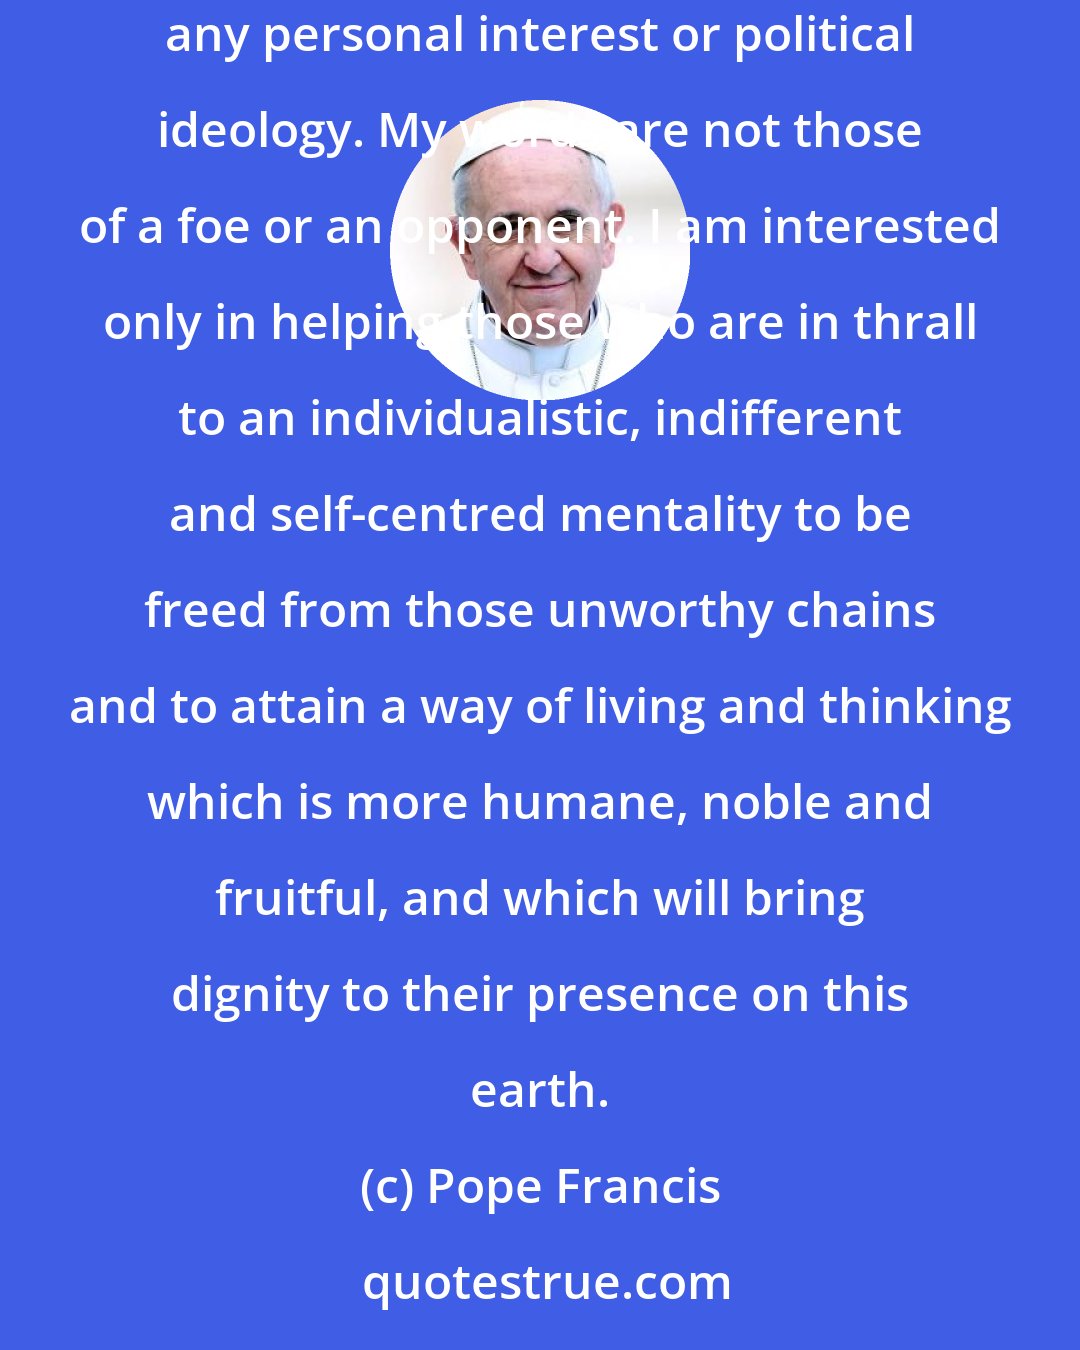 Pope Francis: If anyone feels offended by my words, I would respond that I speak them with affection and with the best of intentions, quite apart from any personal interest or political ideology. My words are not those of a foe or an opponent. I am interested only in helping those who are in thrall to an individualistic, indifferent and self-centred mentality to be freed from those unworthy chains and to attain a way of living and thinking which is more humane, noble and fruitful, and which will bring dignity to their presence on this earth.